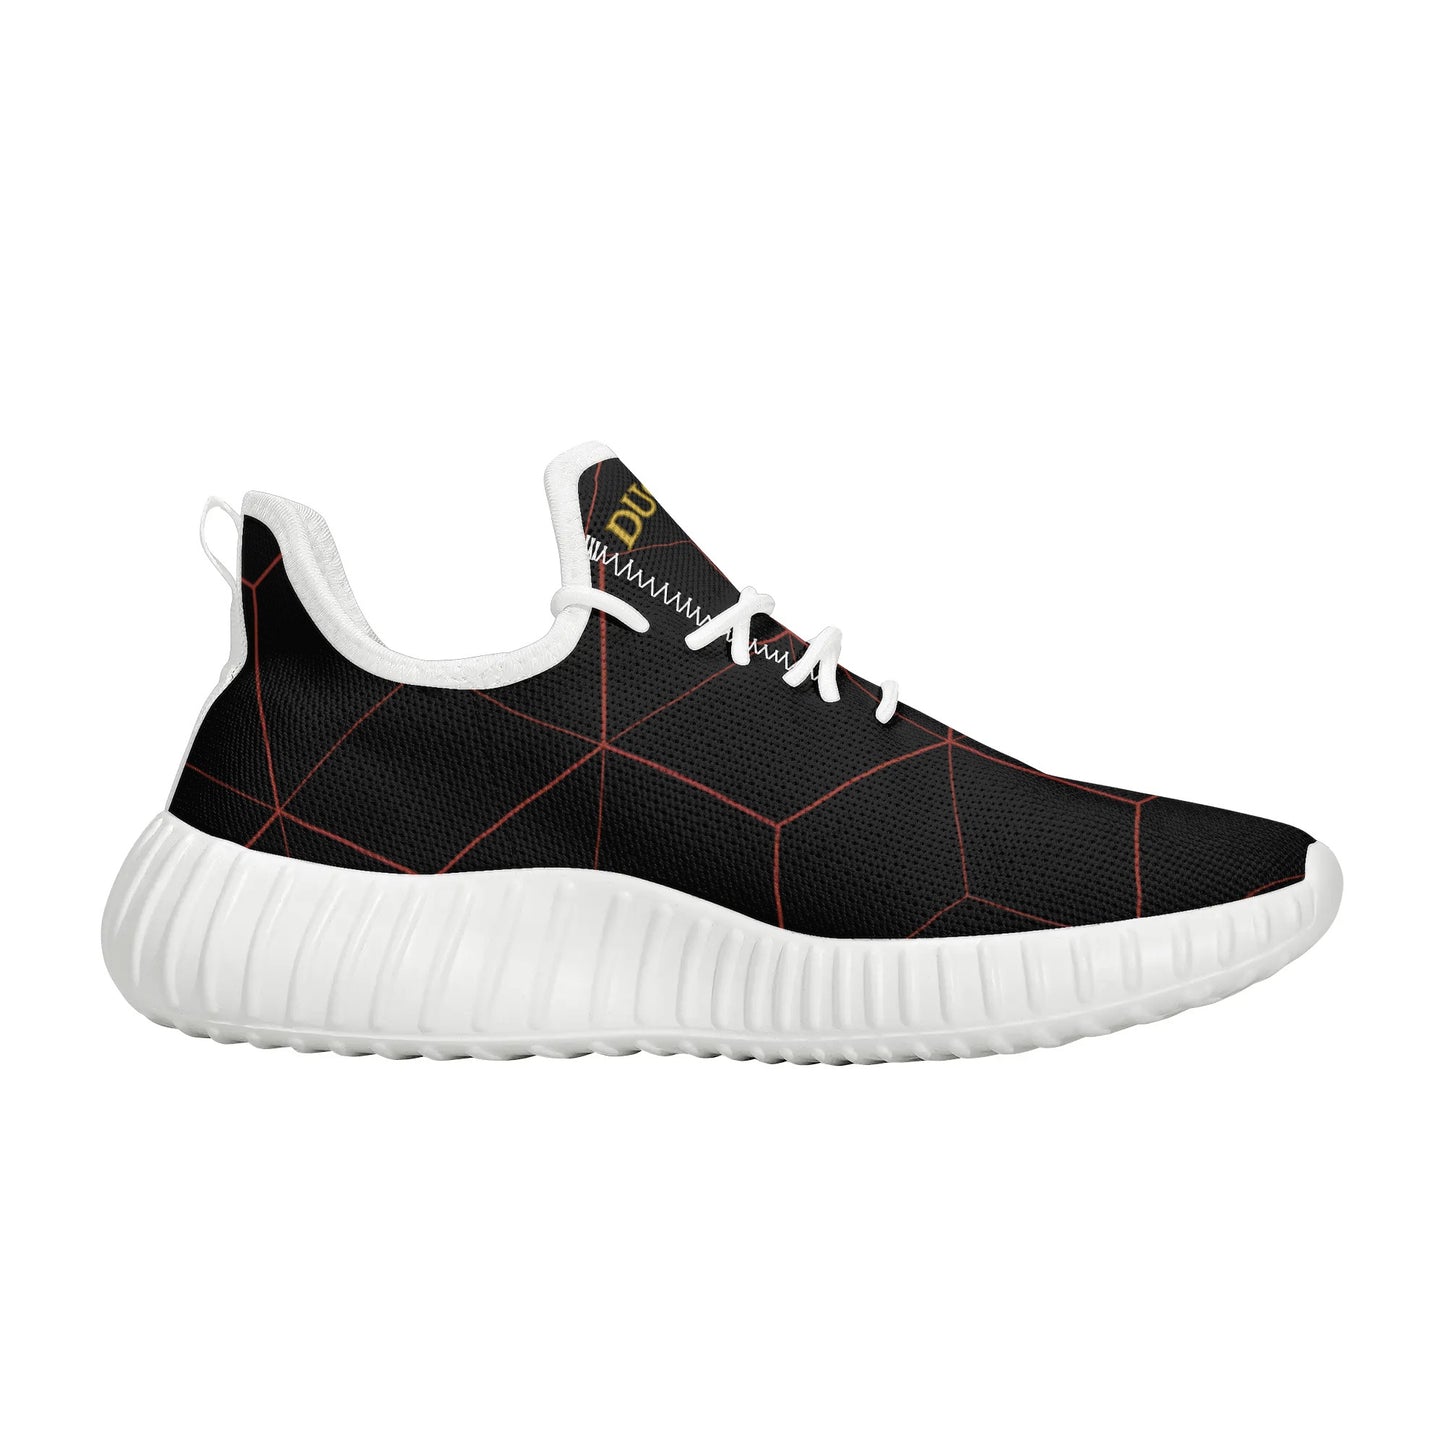 Mens DuGamii Black and Red Mesh Knit Sneakers